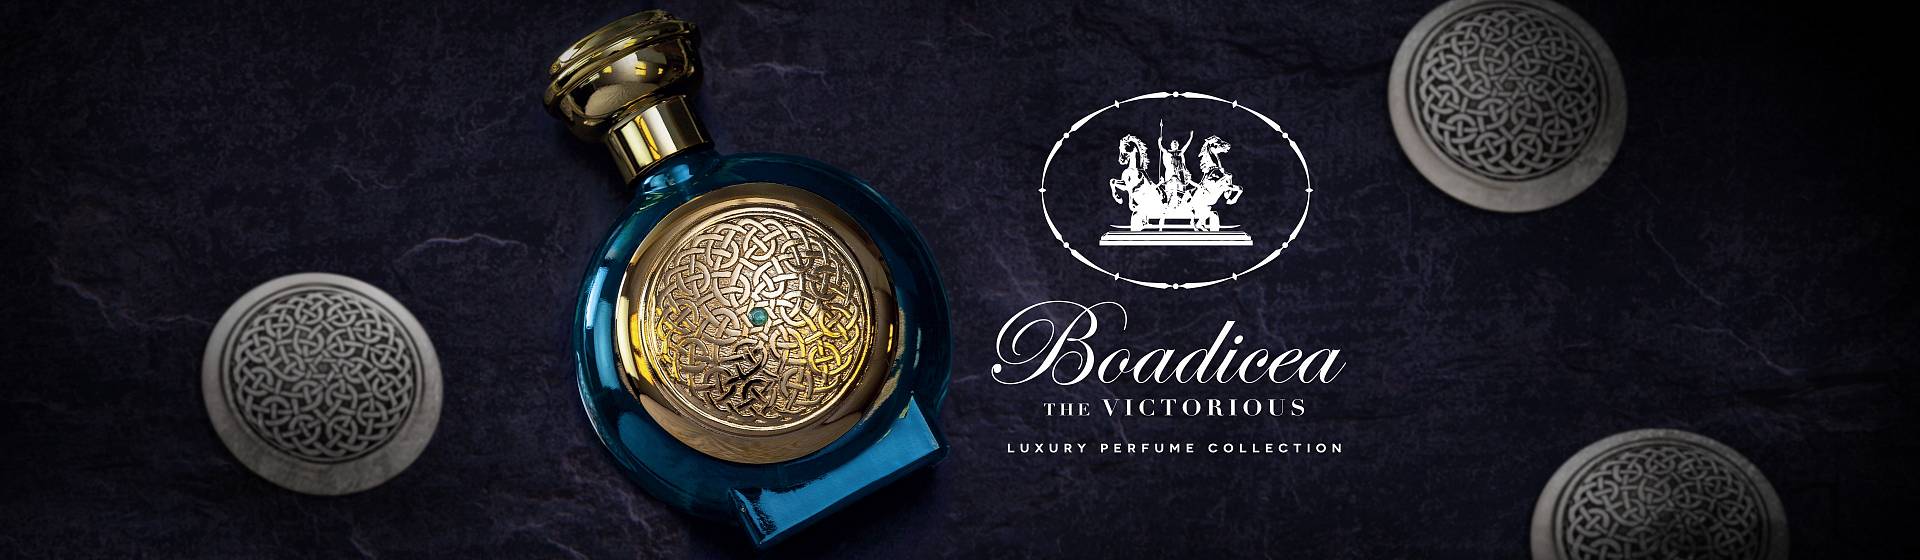 Boadicea The Victorious